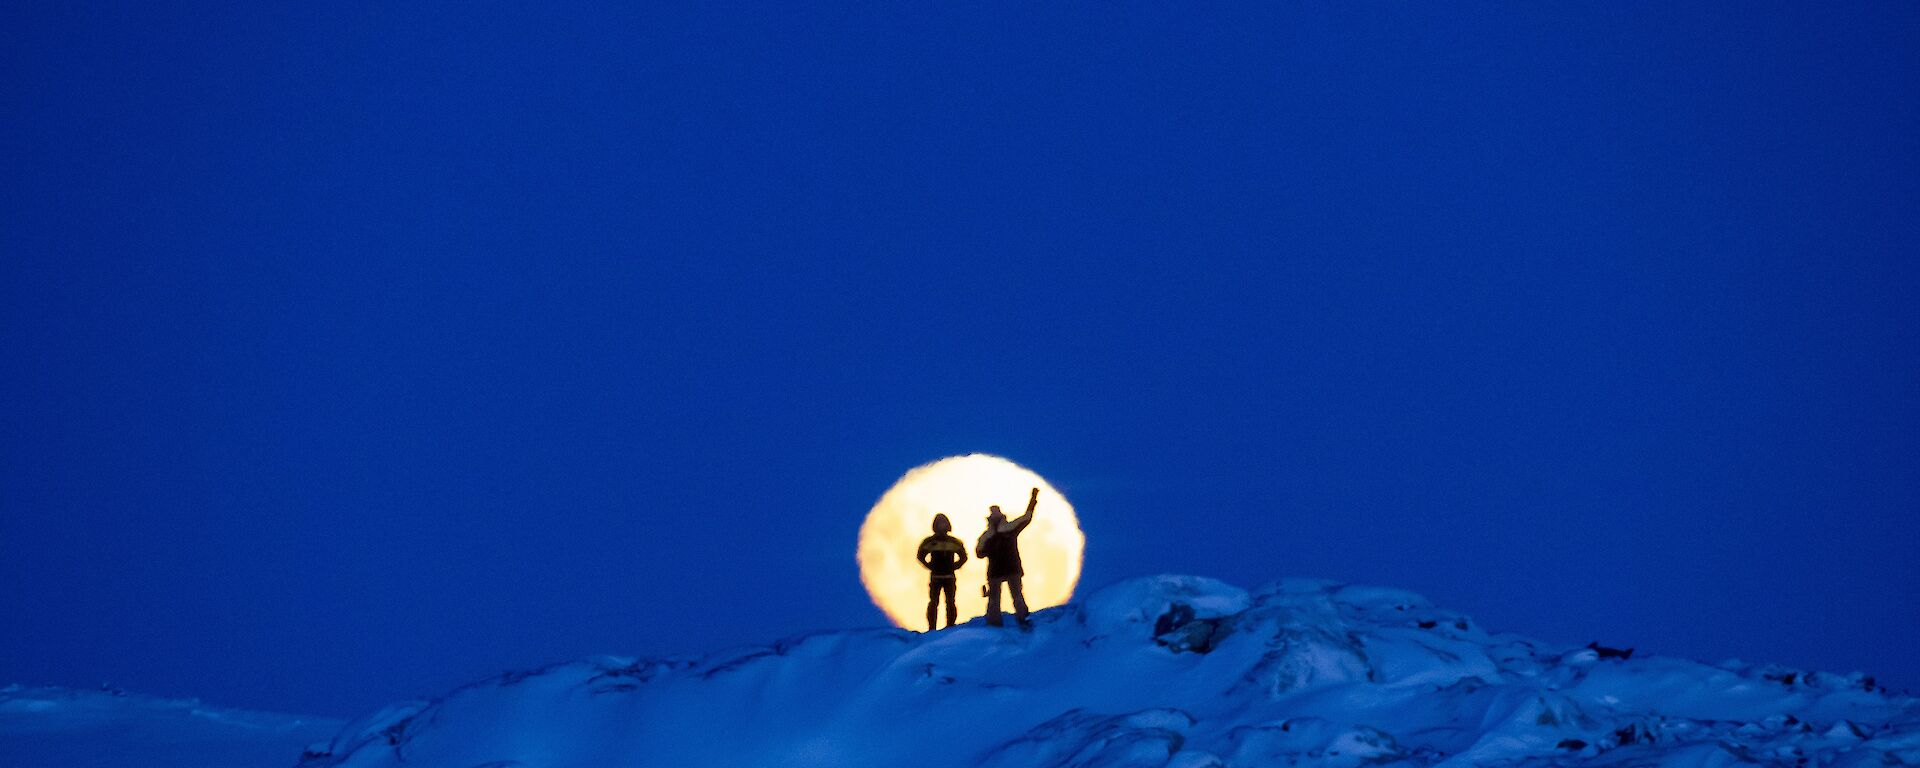 Two expeditioners silhouetted against the moon whilst standing on a snowy mountain